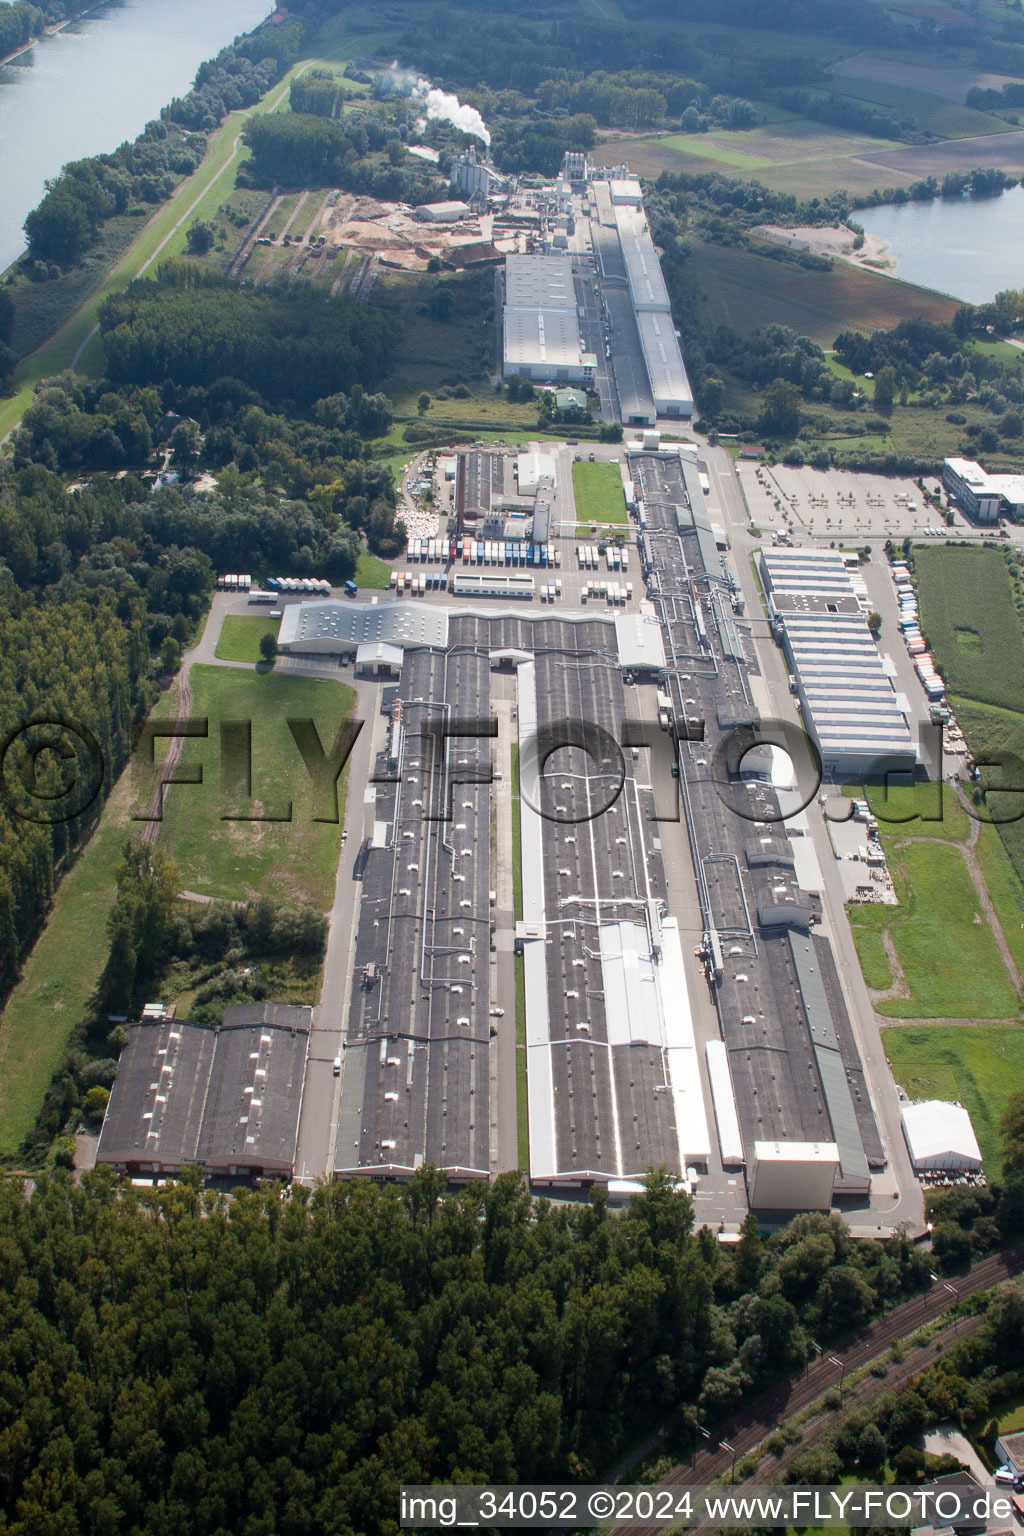 Building complex and grounds of the logistics center Daimler AG Global Logistic Center on the Island Gruen in Germersheim in the state Rhineland-Palatinate, Germany from the plane